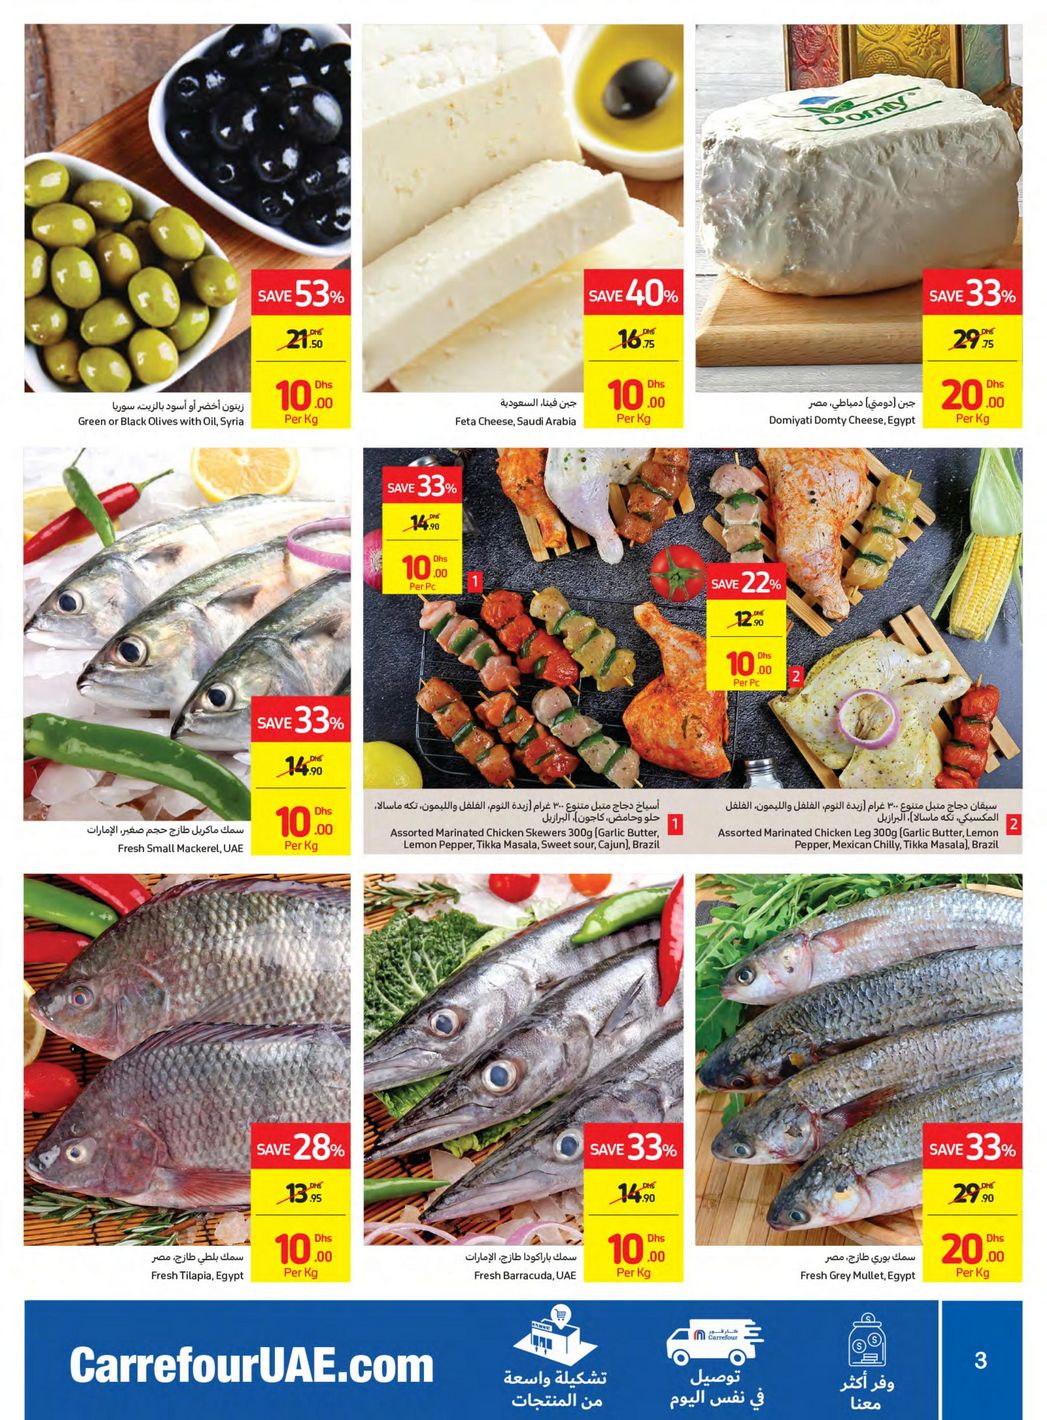 Carrefour Offers from 13/2 till 23/2 | Carrefour UAE 4